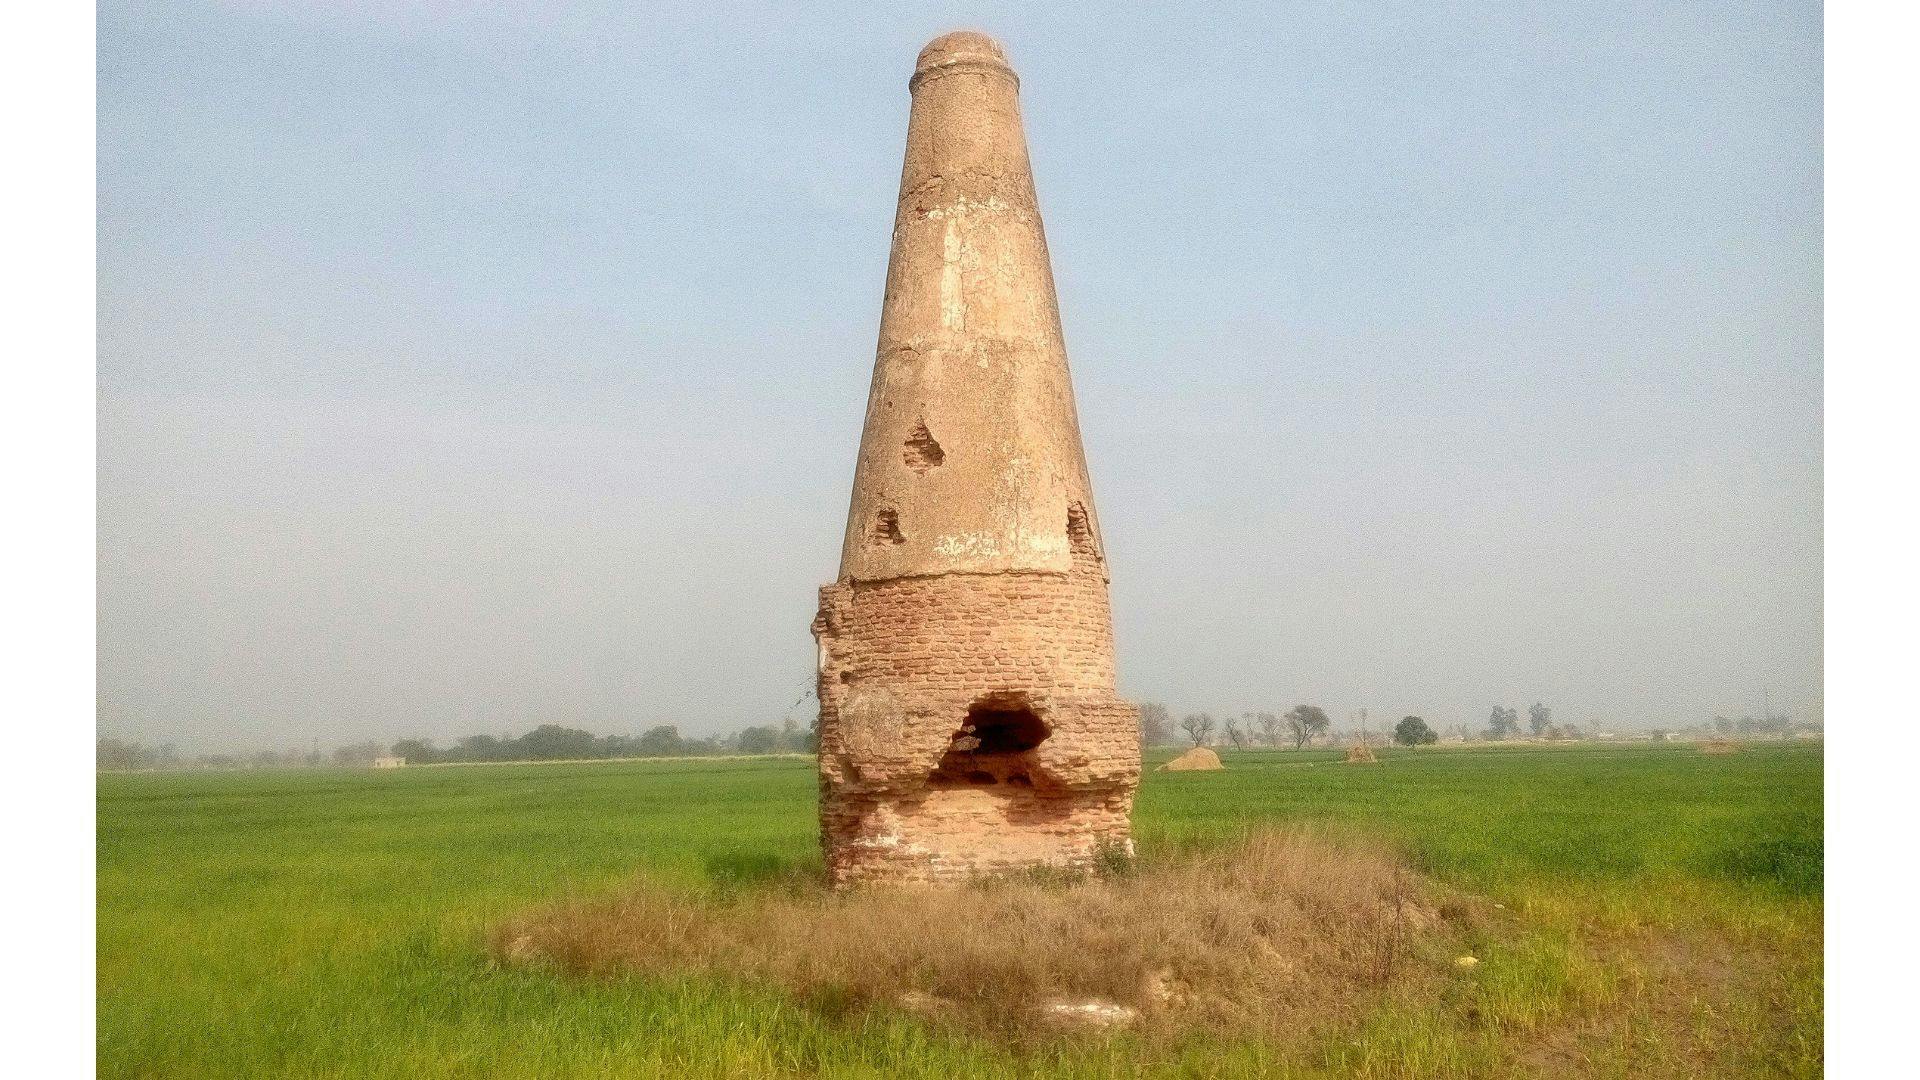 Kos Minar in an agricultural field | Wikimedia Commons